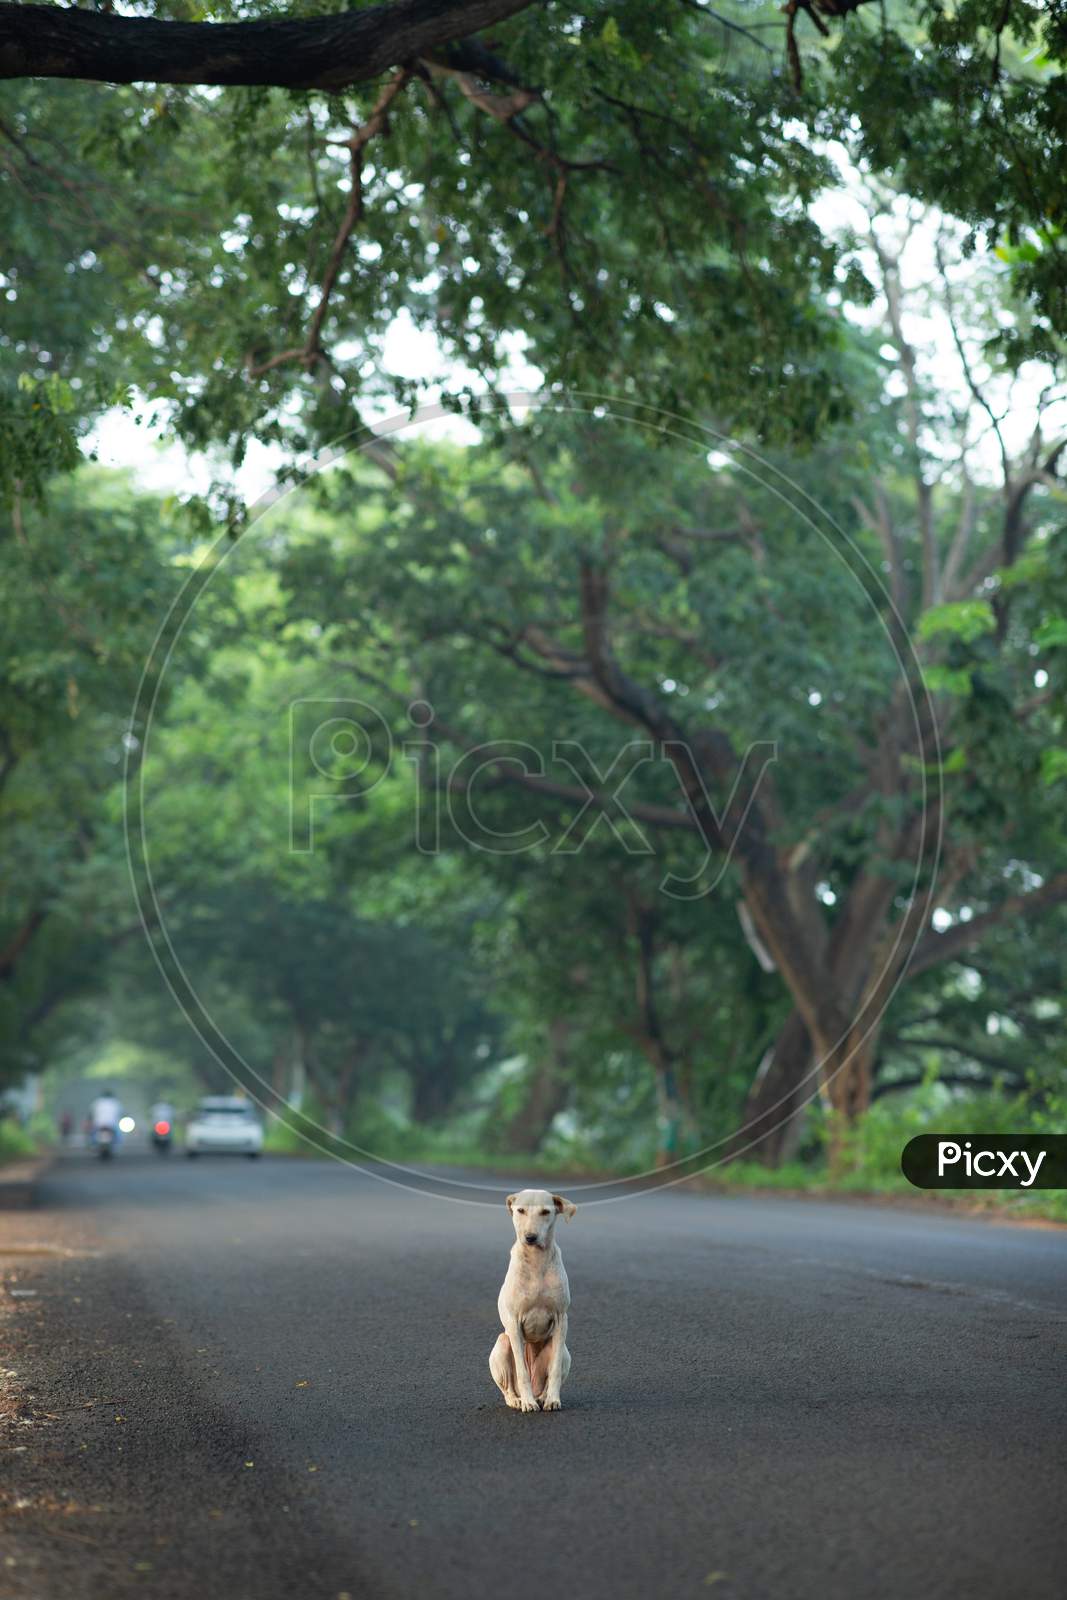 A Stray dog during the early morning